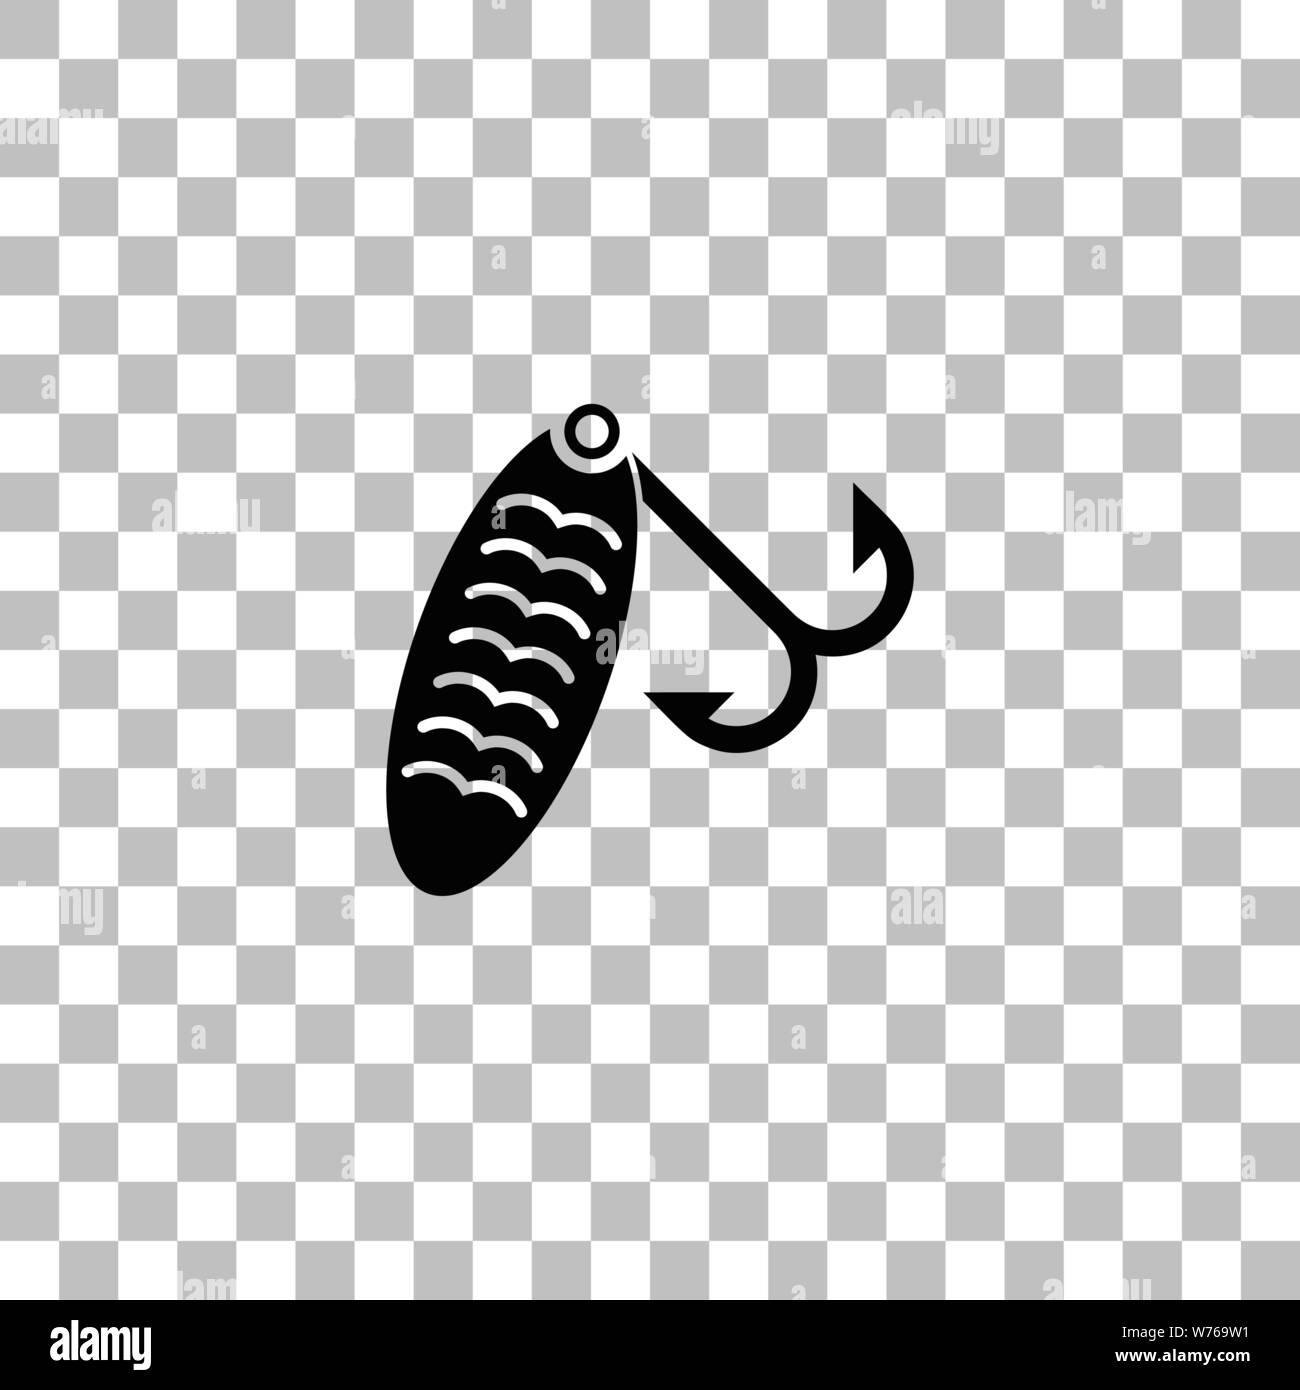 Fishing tackle. Black flat icon on a transparent background. Pictogram for your project Stock Vector